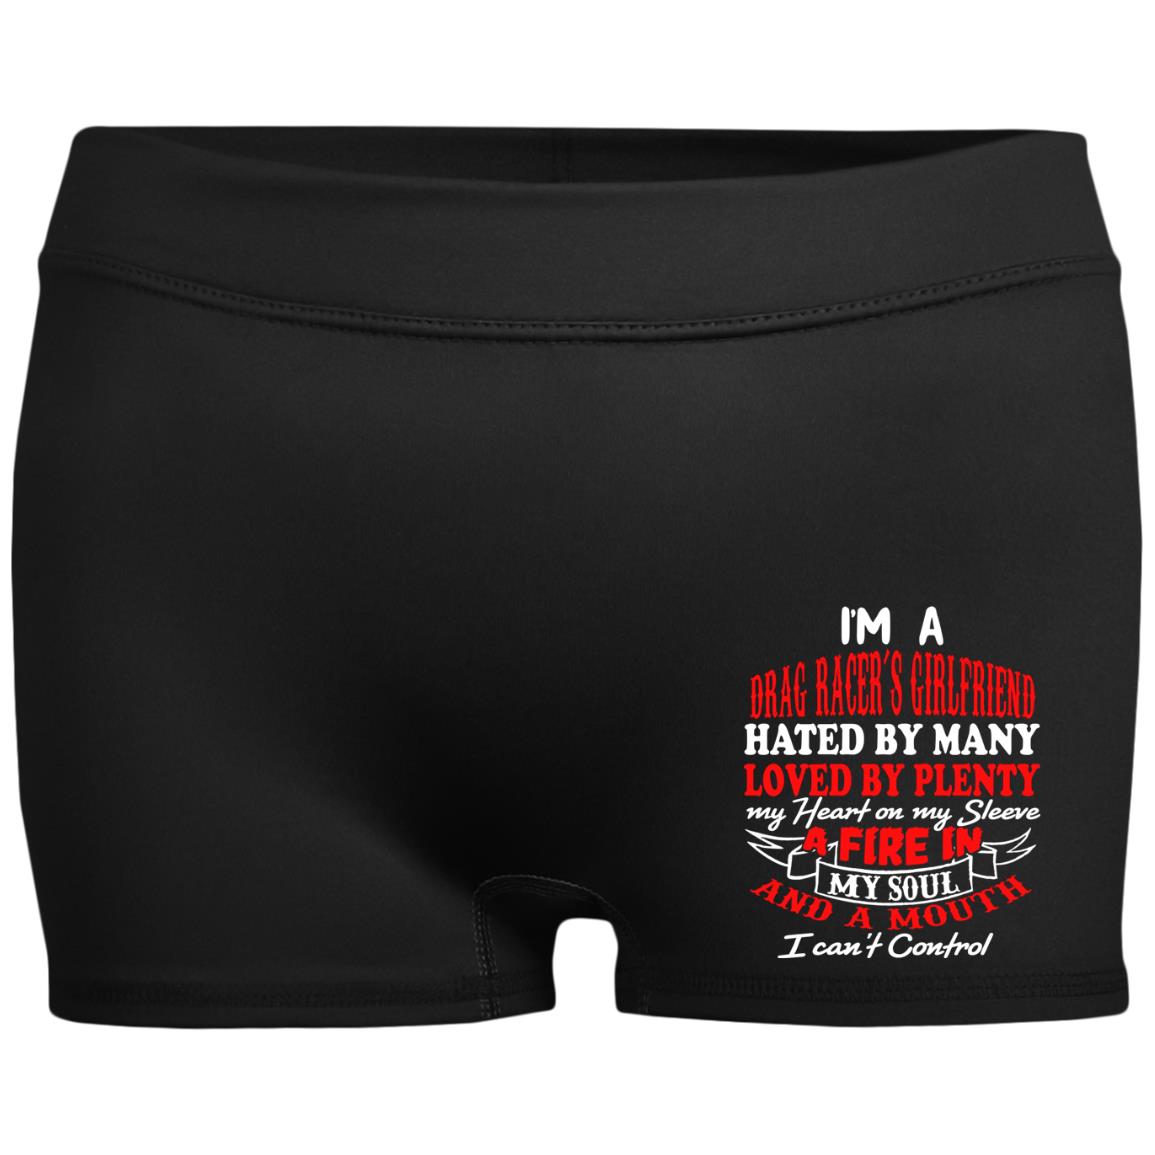 I'm A Drag Racer's Girlfriend Hated By Many Loved By Plenty Ladies' Fitted Moisture-Wicking 2.5 inch Inseam Shorts